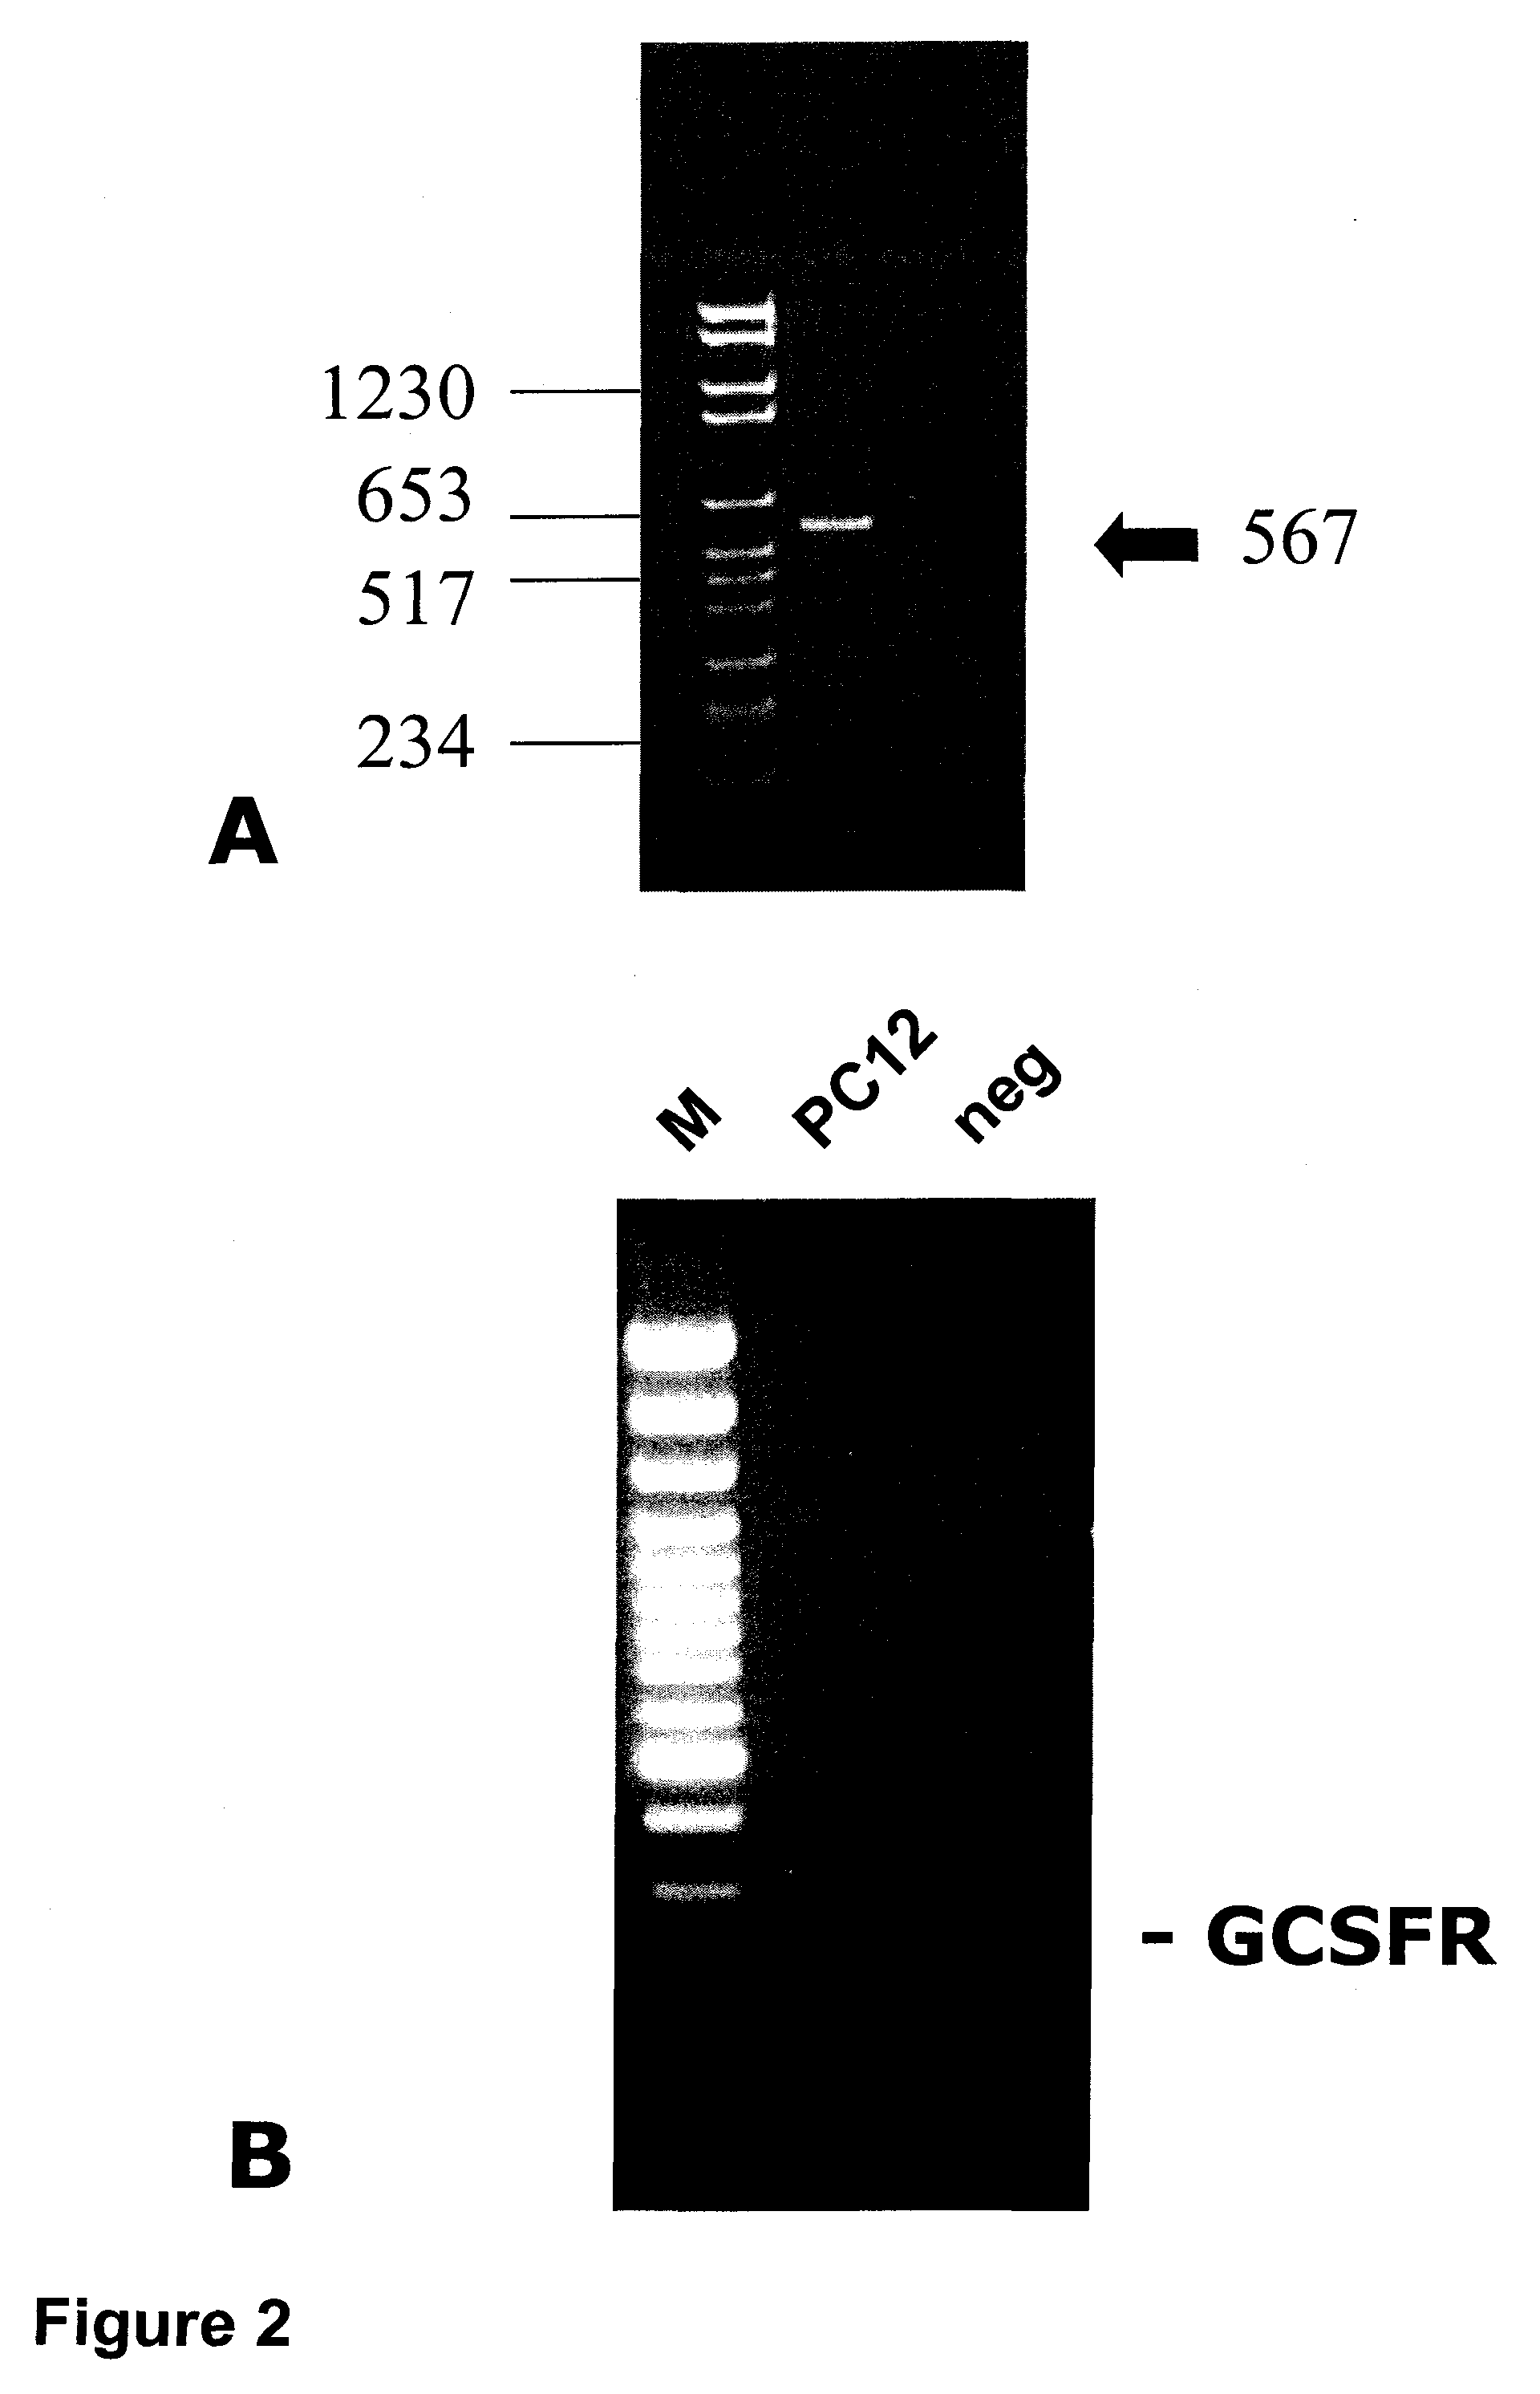 Methods of treating neurological conditions with hematopeitic growth factors